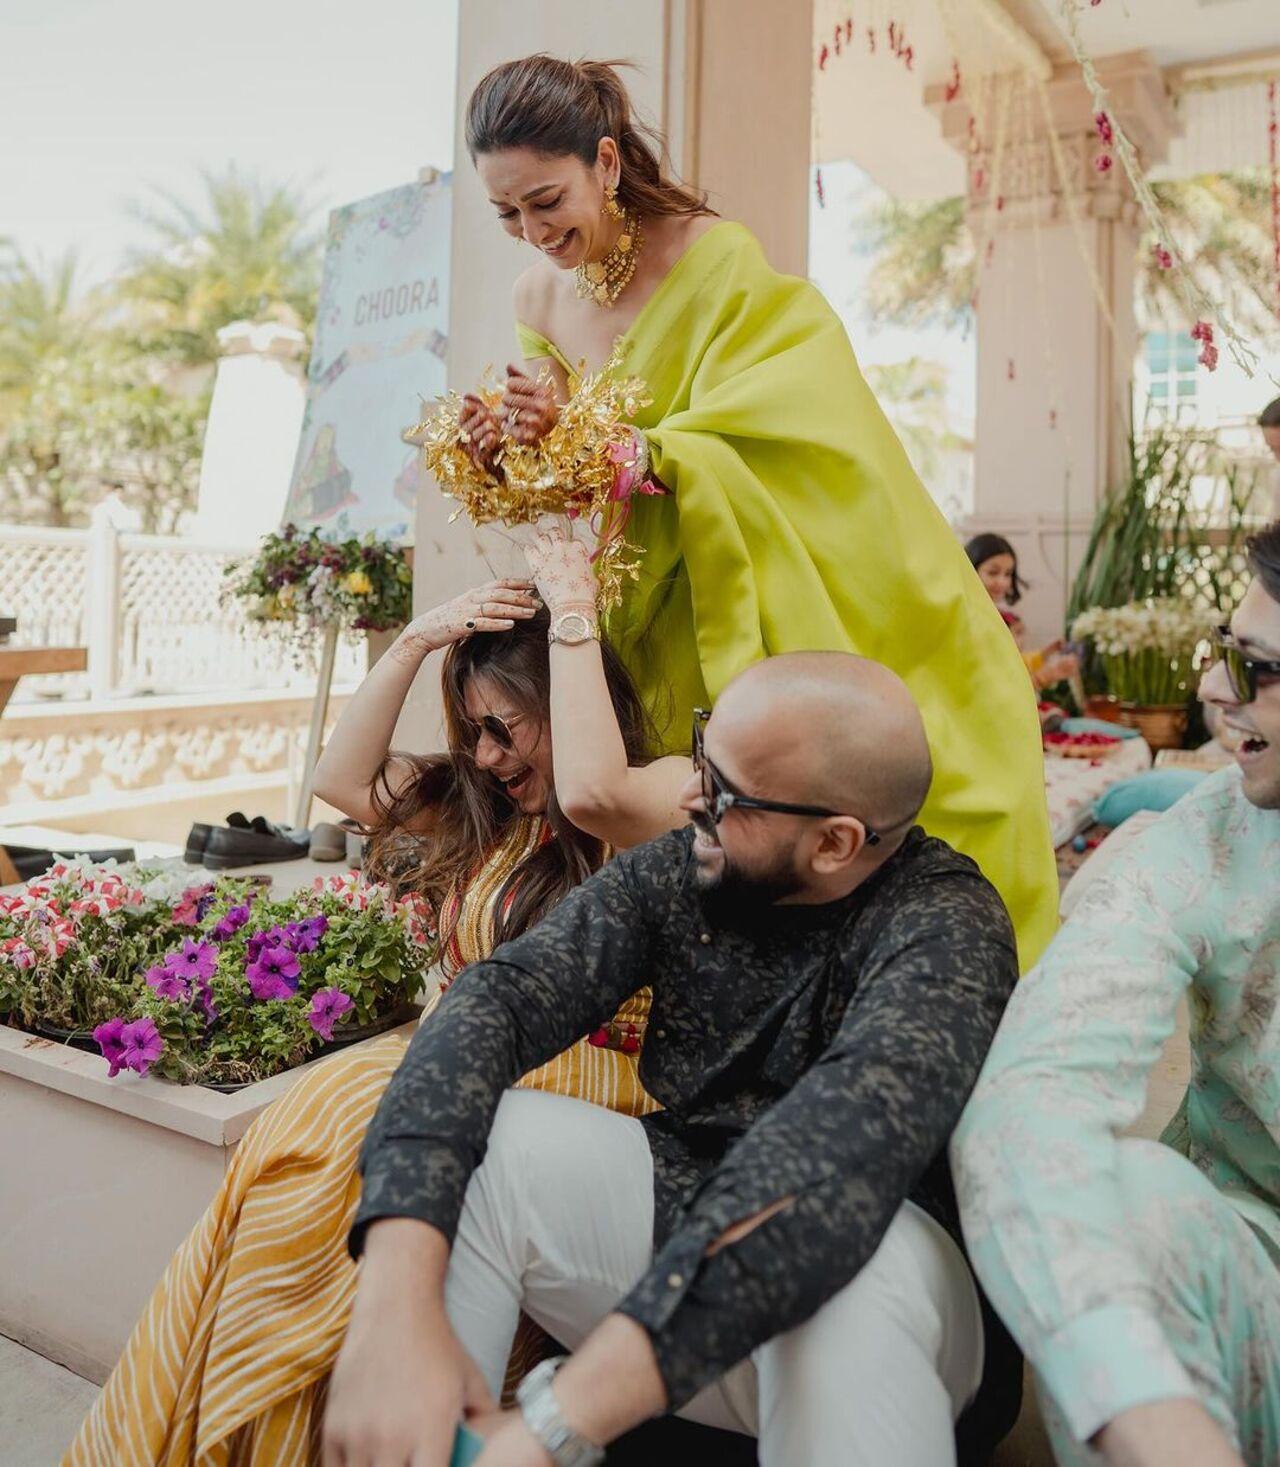 Kriti's photo album also showed her doing the chooda ritual on her family and friends where the bride shakes the kaleeras and whoever gets a piece fallen on their head is the next in line to marry. 